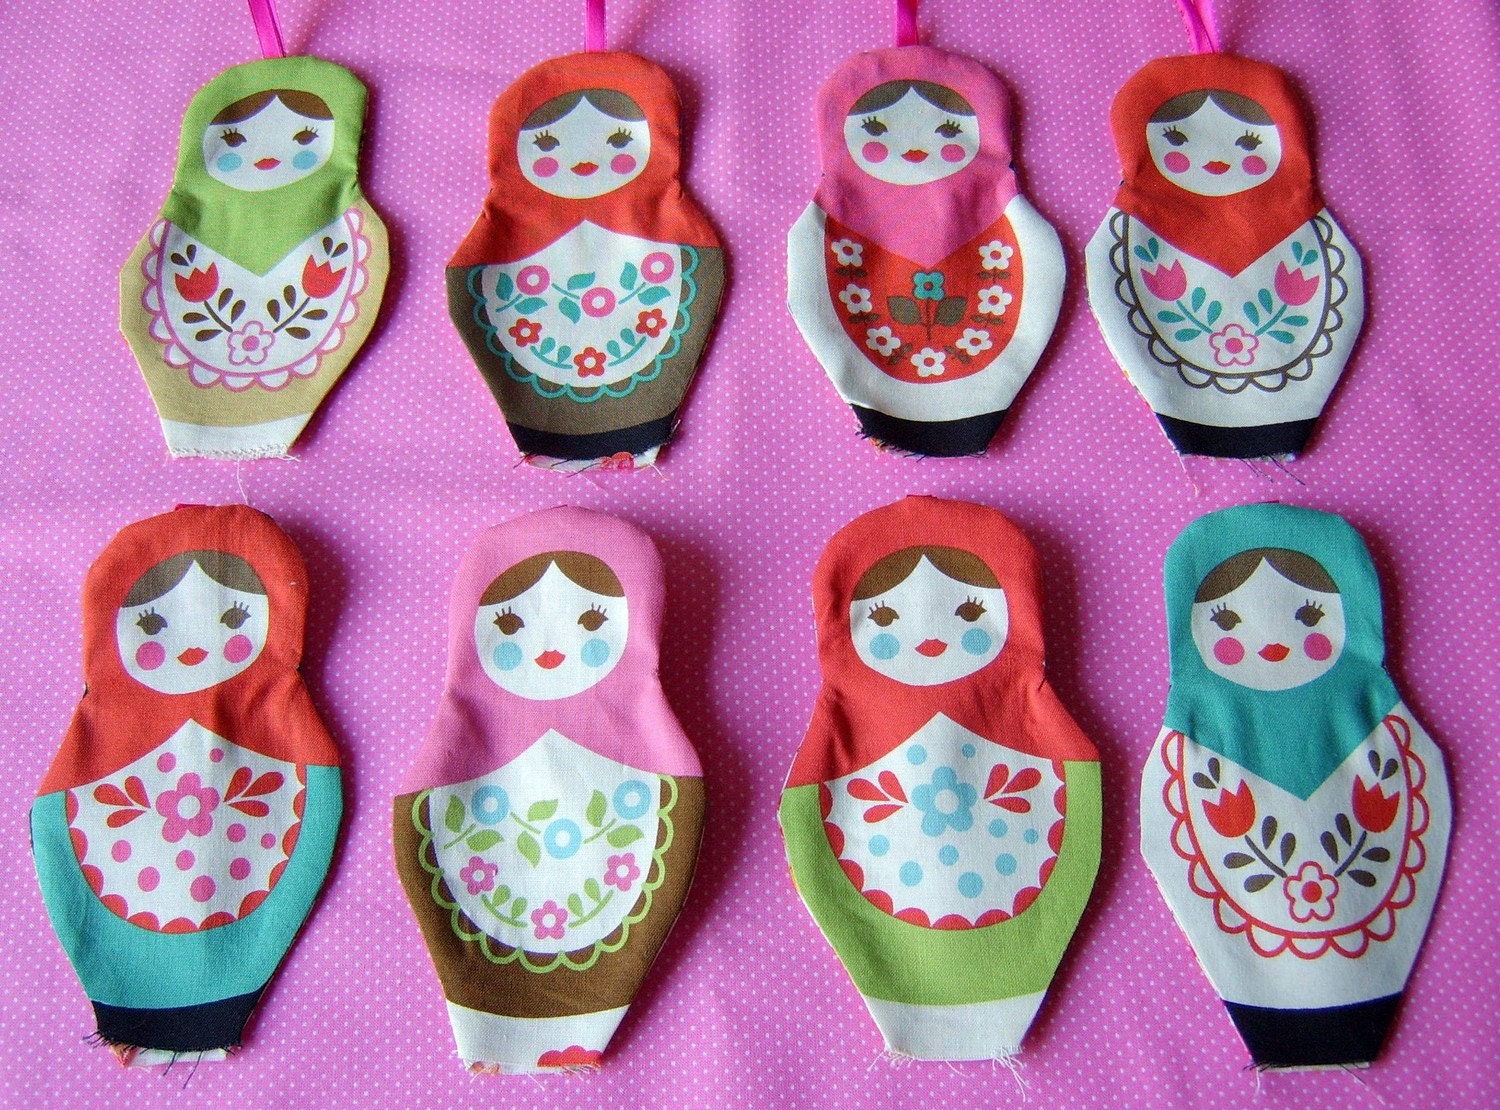 8 Christmas ornament russian dolls featured in decor8